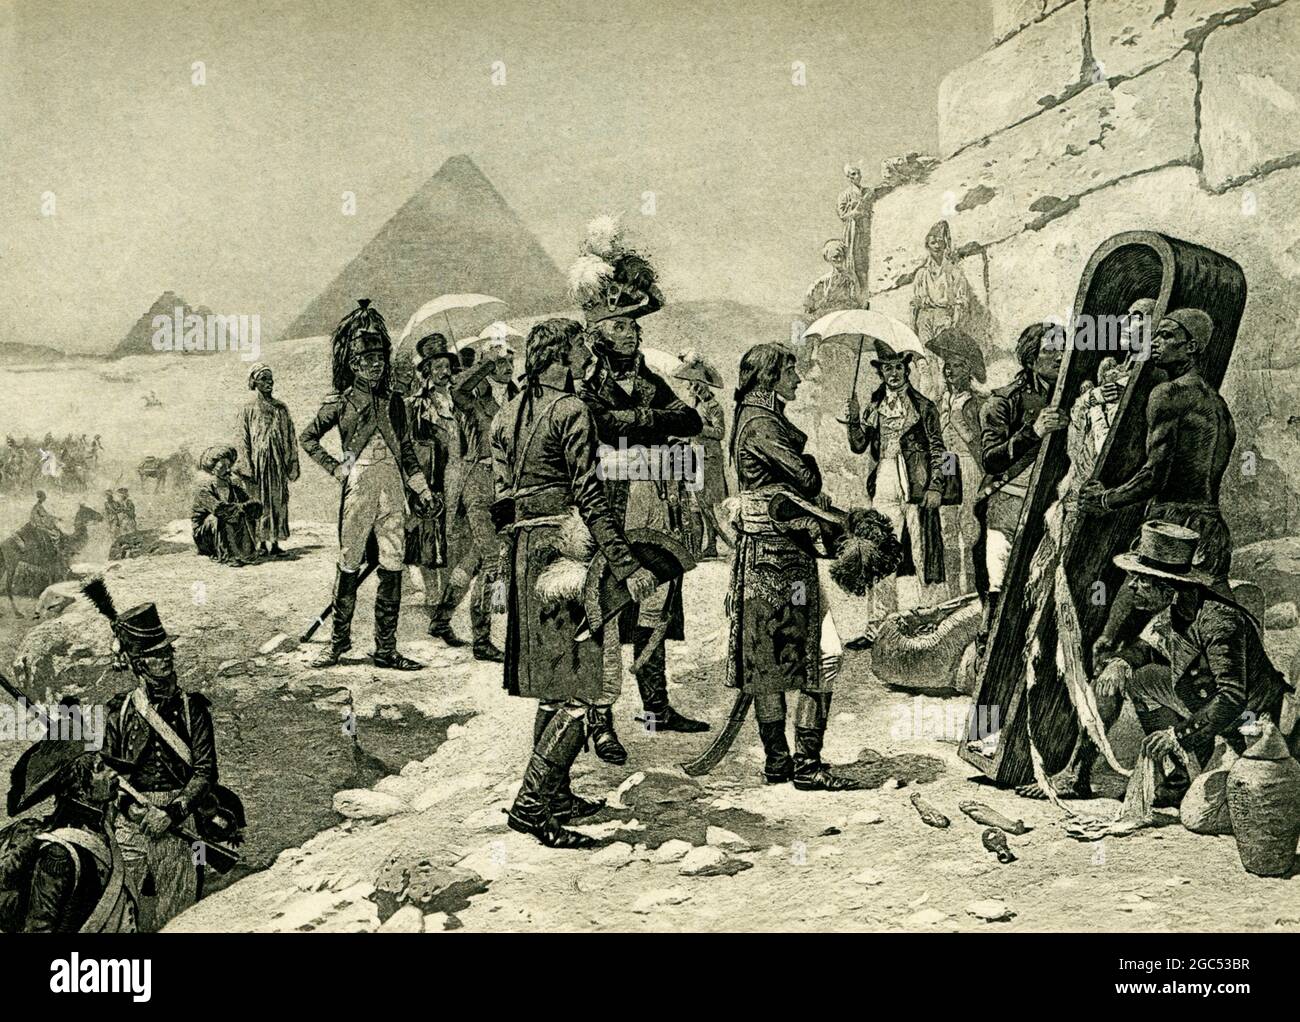 The caption accompanying this 1903 illustration in Gaston Maspero’s book on  History of Egypt reads: “Bonaparte in Egypt after painting by M Orange.”  When Napoleon was n Egypt, he toured the ancient sites, including the Sphinx, and had his savants note all pertinent facts. Here he and his men are shown looking at an uncovered mummy. Maurice Orange, who was born in 1867 and died in 1916, was a French painter and artist. Stock Photo